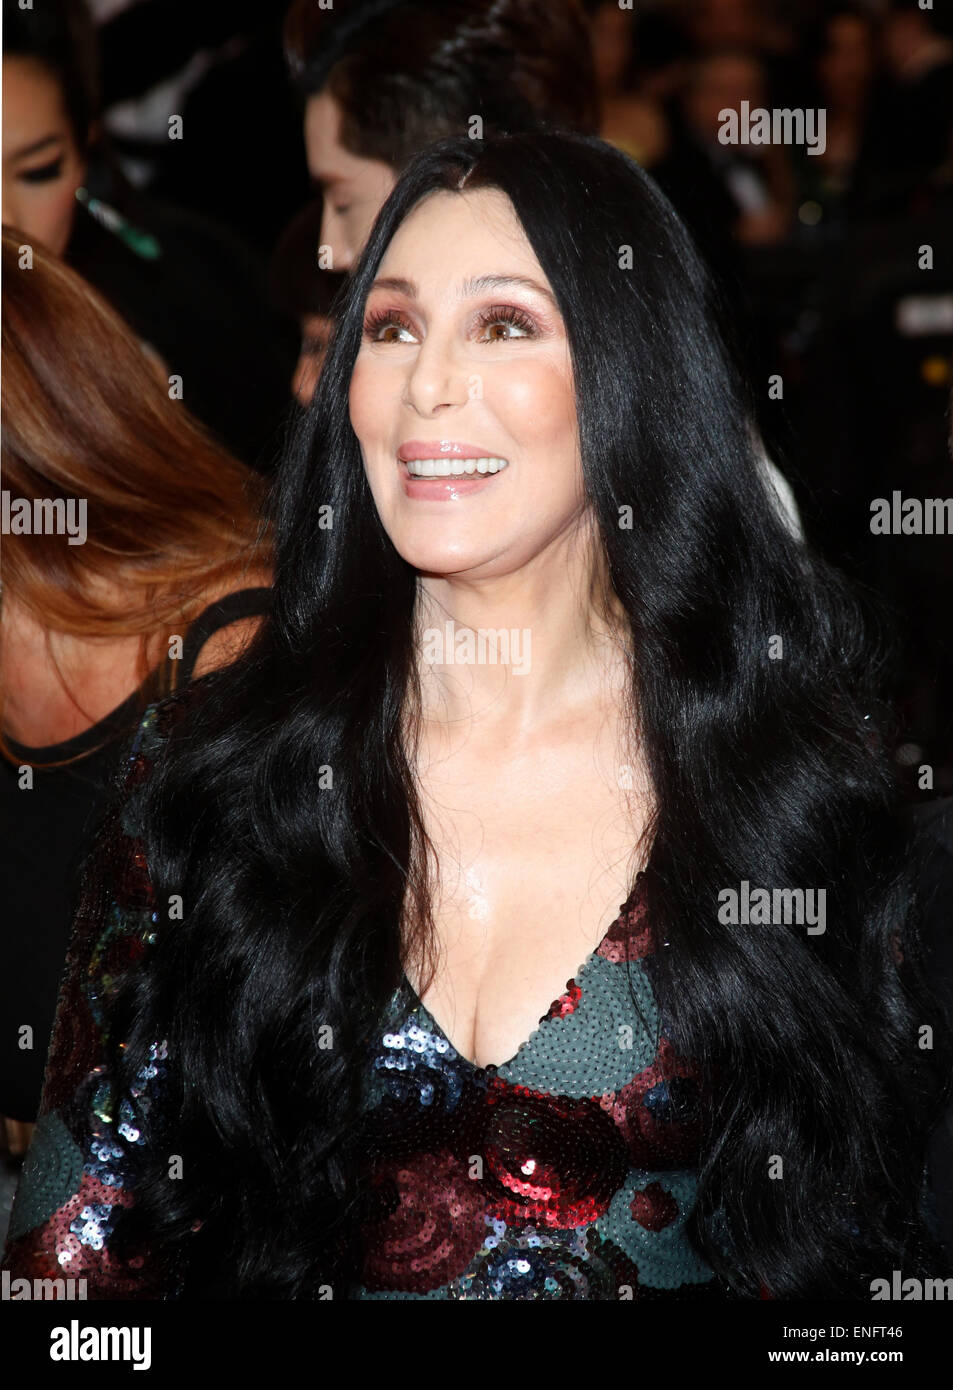 New York, USA . 4th May, 2015. Actress and singer Cher attends the 2015 Costume Institute Gala Benefit celebrating the exhibition 'China: Through the Looking Glass' at The Metropolitan Museum of Art in New York, USA, on 04 May 2015. Photo: Hubert Boesl/dpa/Alamy Live News Credit:  dpa picture alliance/Alamy Live News Stock Photo